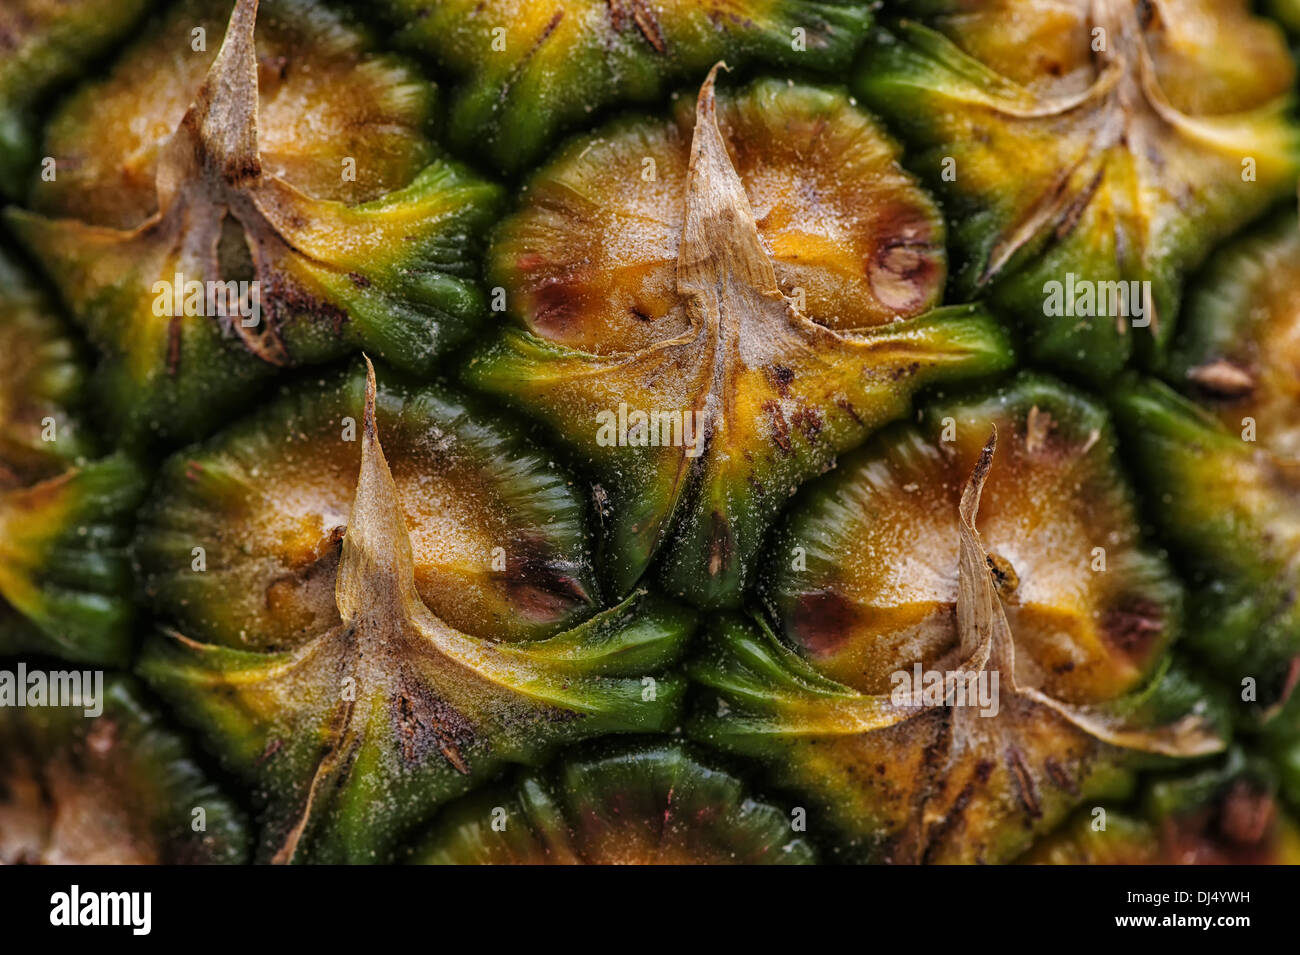 Detail of the skin of a ripe pineapple Stock Photo